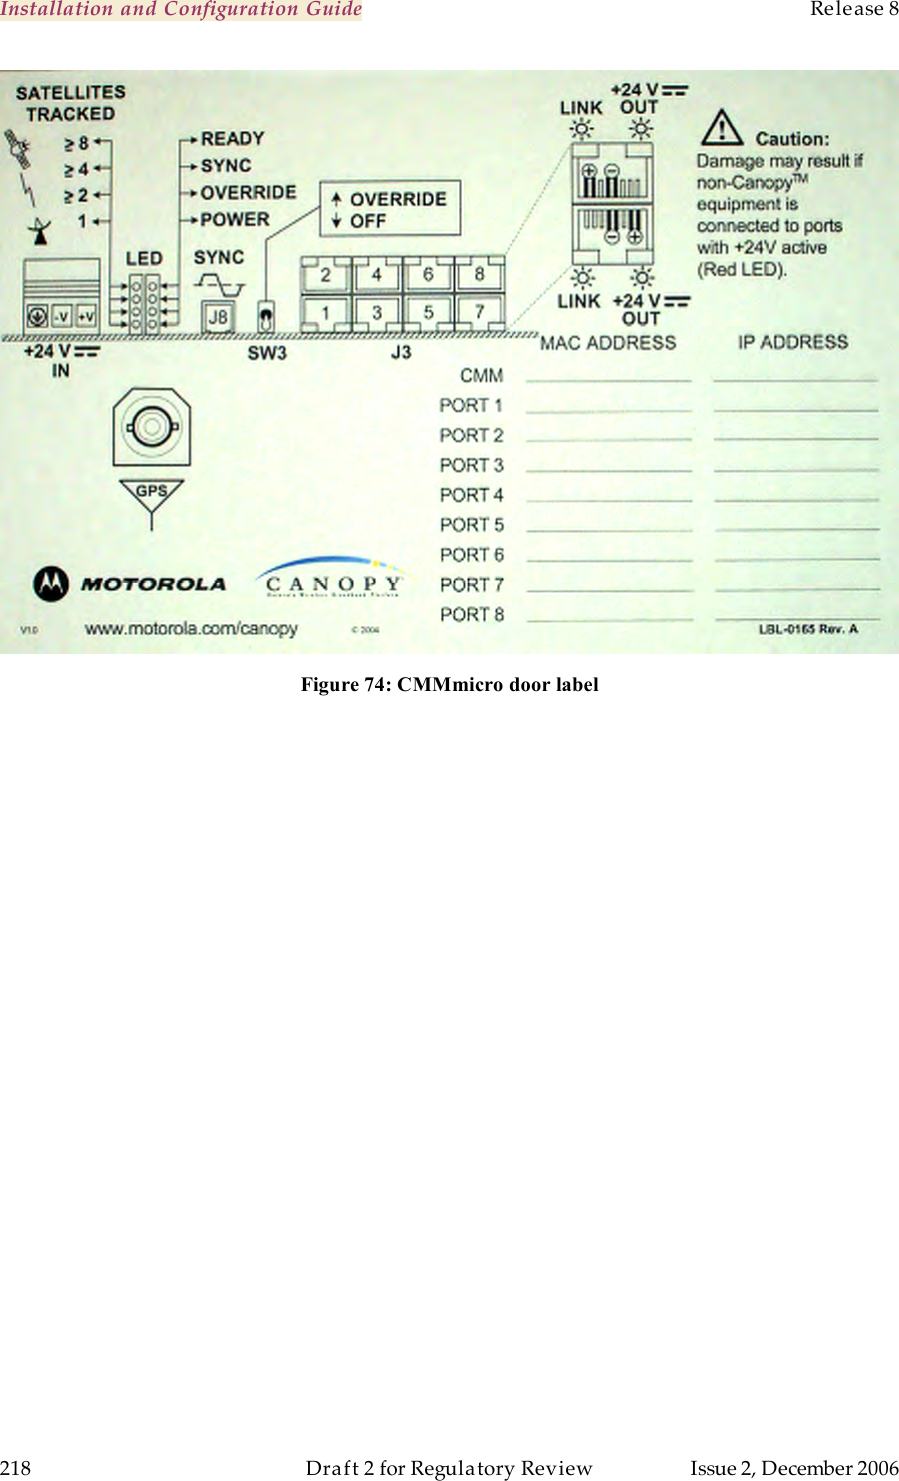 Installation and Configuration Guide    Release 8   218  Draft 2 for Regulatory Review  Issue 2, December 2006  Figure 74: CMMmicro door label 